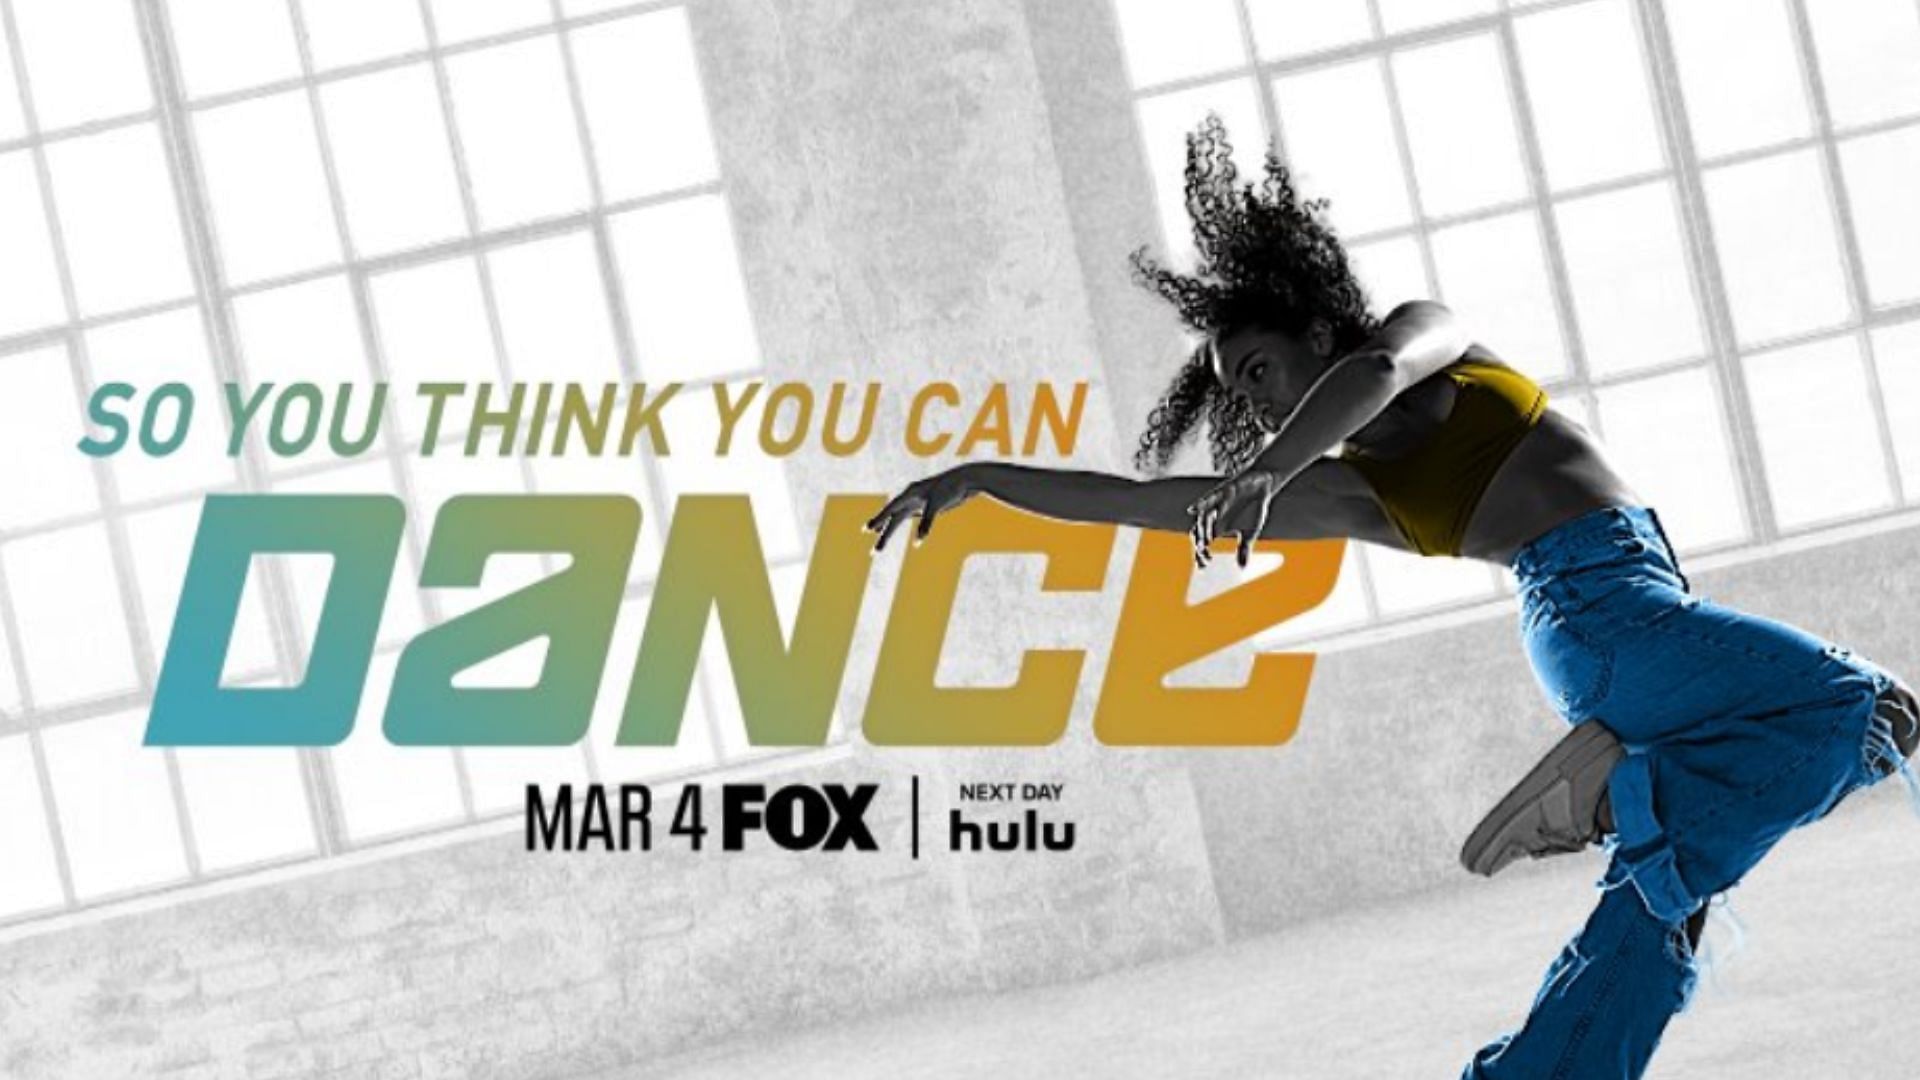 So You Think You Can Dance season 18 will premier this weekend